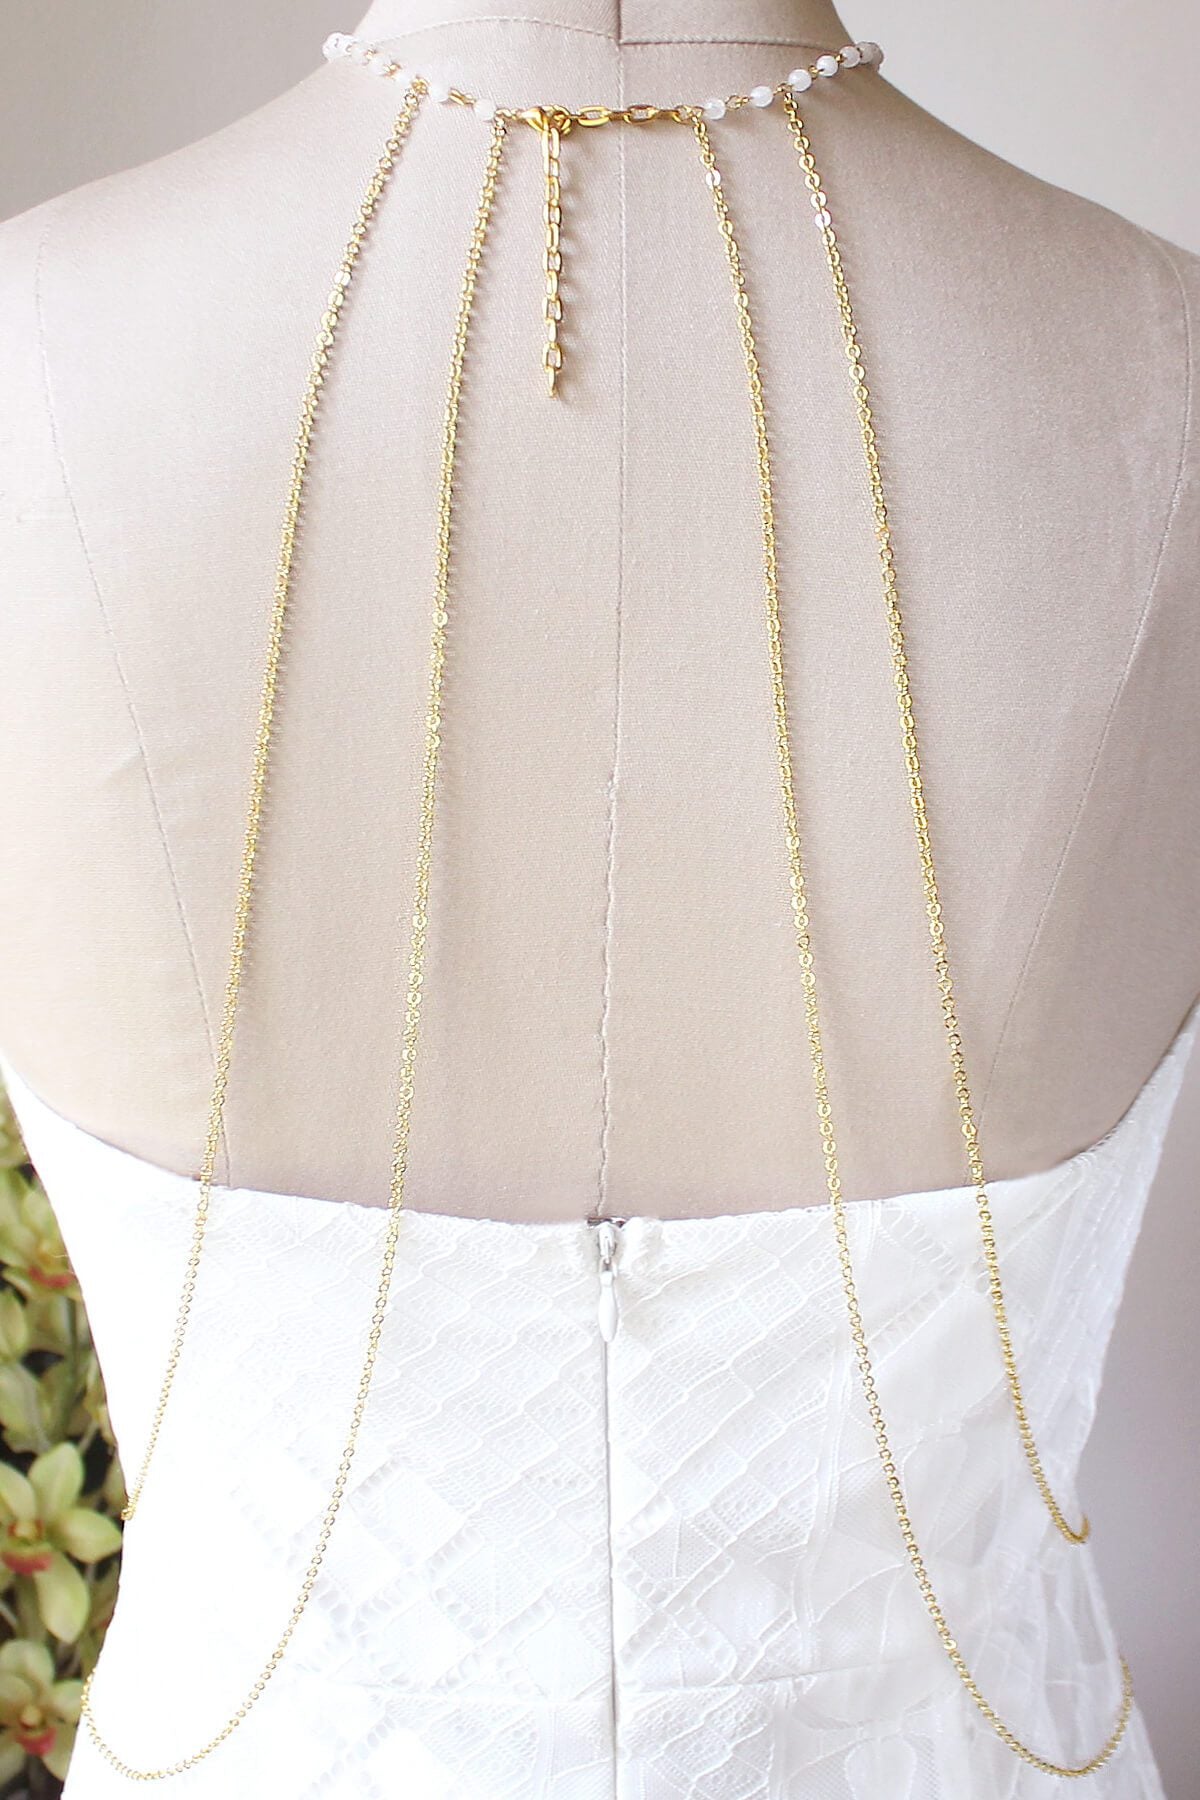 Gold Tallulah Body Chain Harness Necklace from back